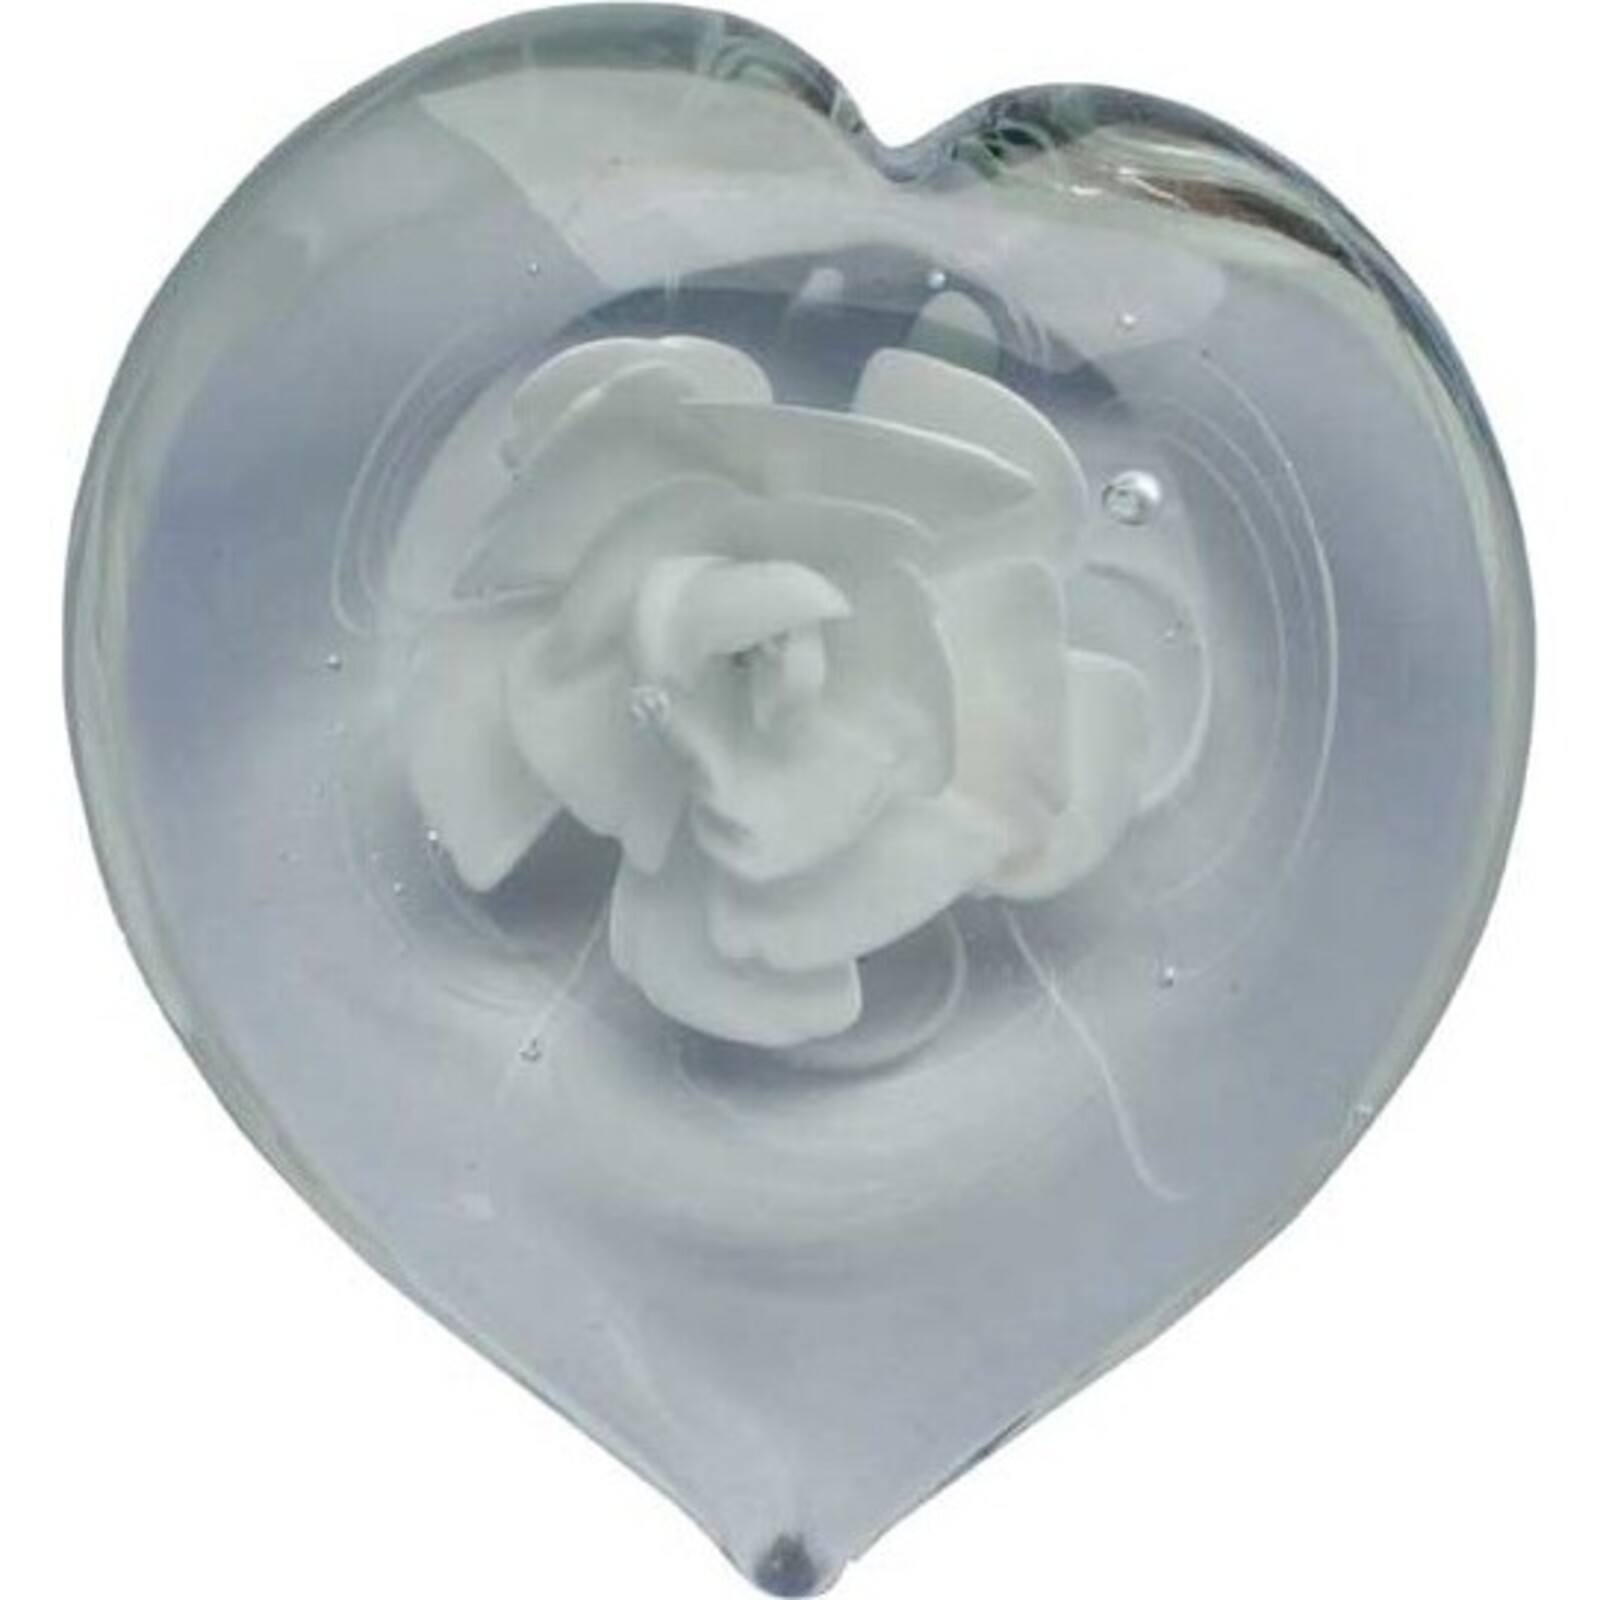 Heart Paperweight - White Rose